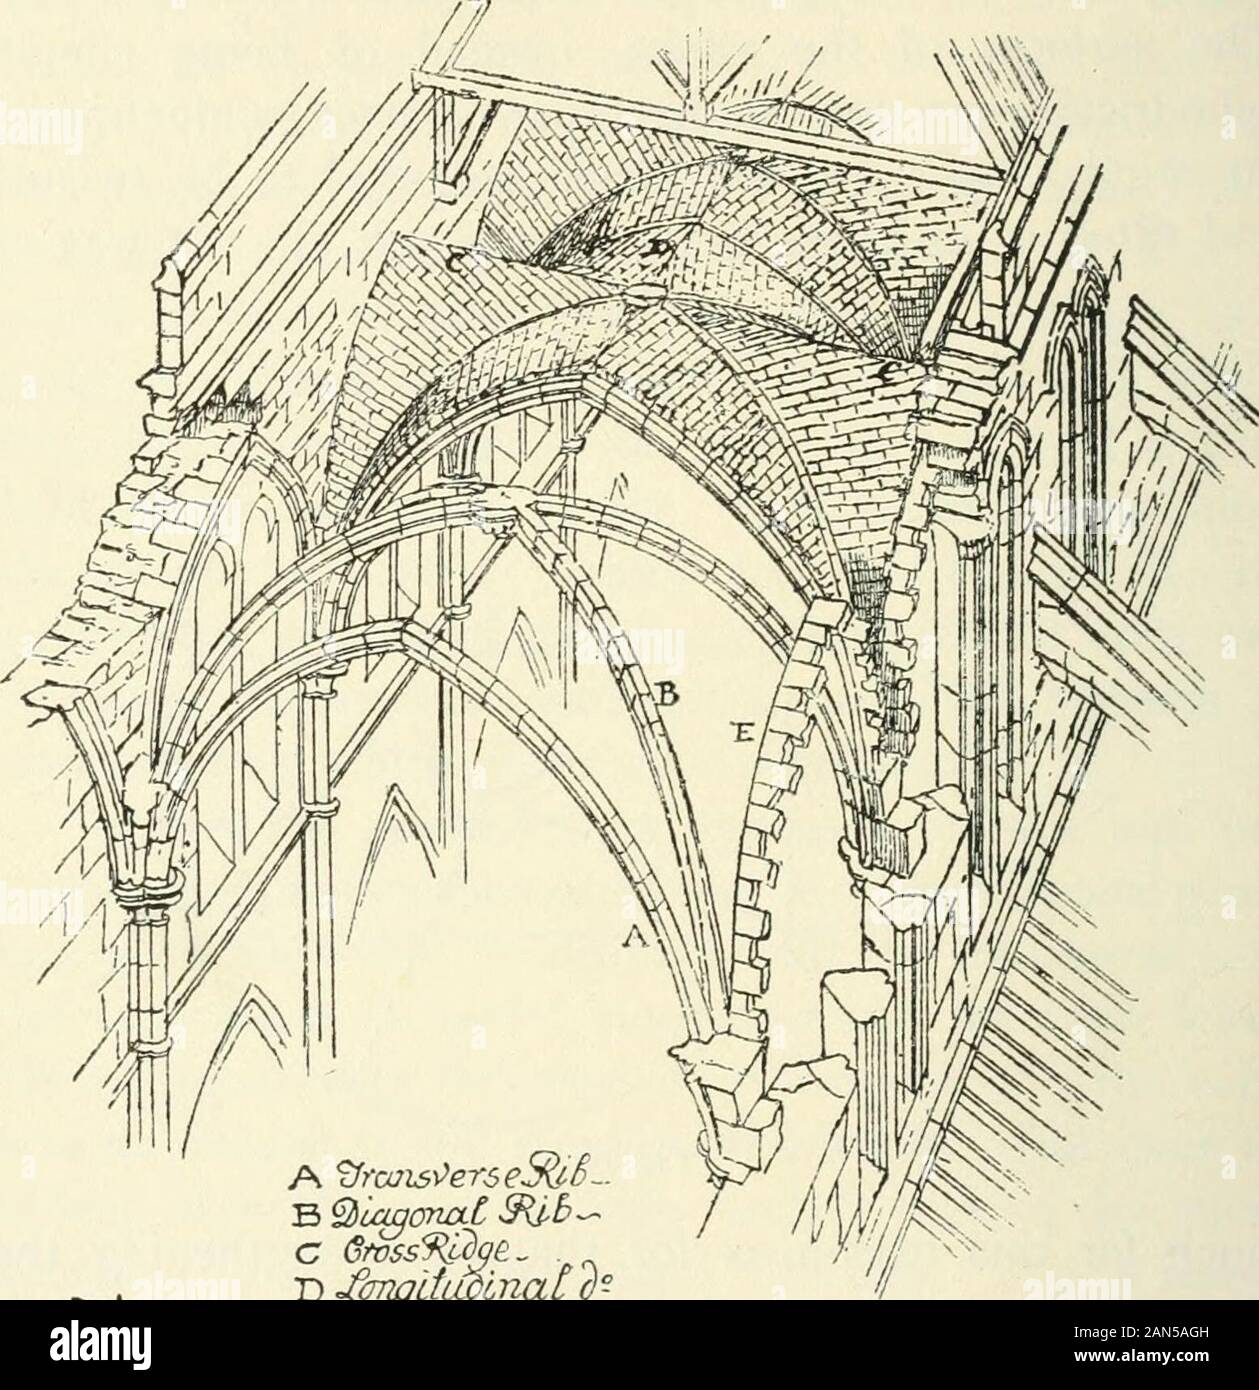 Gothic architecture in France, England, and Italy . Fig. 9. much for this reason as for that of strengthening thelines of intersection that ribbed vaulting- was invented. RibandIt was impossible to make an even junction by simply Nukingbringing the curved surfaces together without so muchwinding and twisting as to be dangerous: but it waseasy enough to build ribs with a regular curve whichwould be both sightly and strong, and the panels orvaulting surfaces could be fitted between them and reston them securely in spite of their winding surfaces. 3—2 36 THE GOTHIC VAULT [CH. Ill Rib and panel va Stock Photo